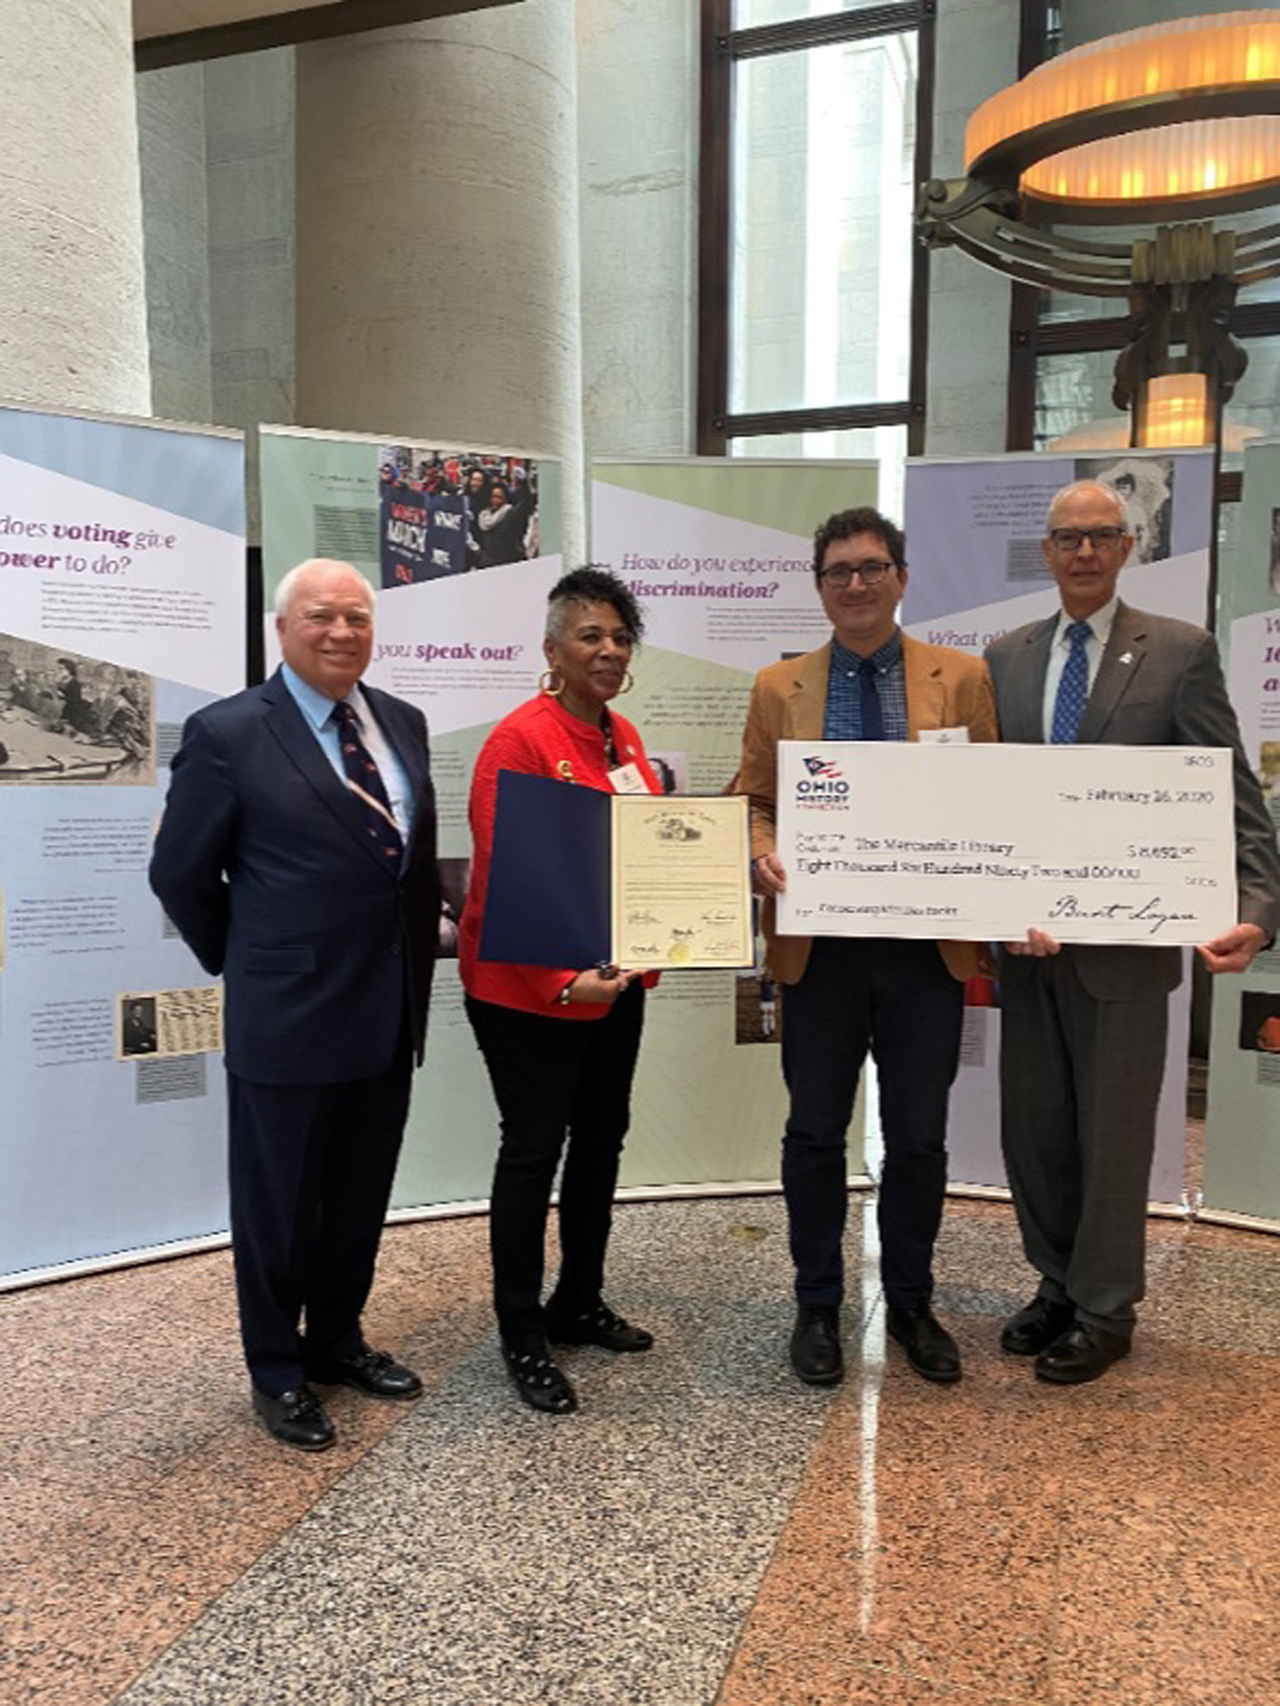 Rep. Ingram at the Statehood Day Celebration with members of the Cincinnati Museum Center and the Mercantile Library, who received Ohio History Grants.